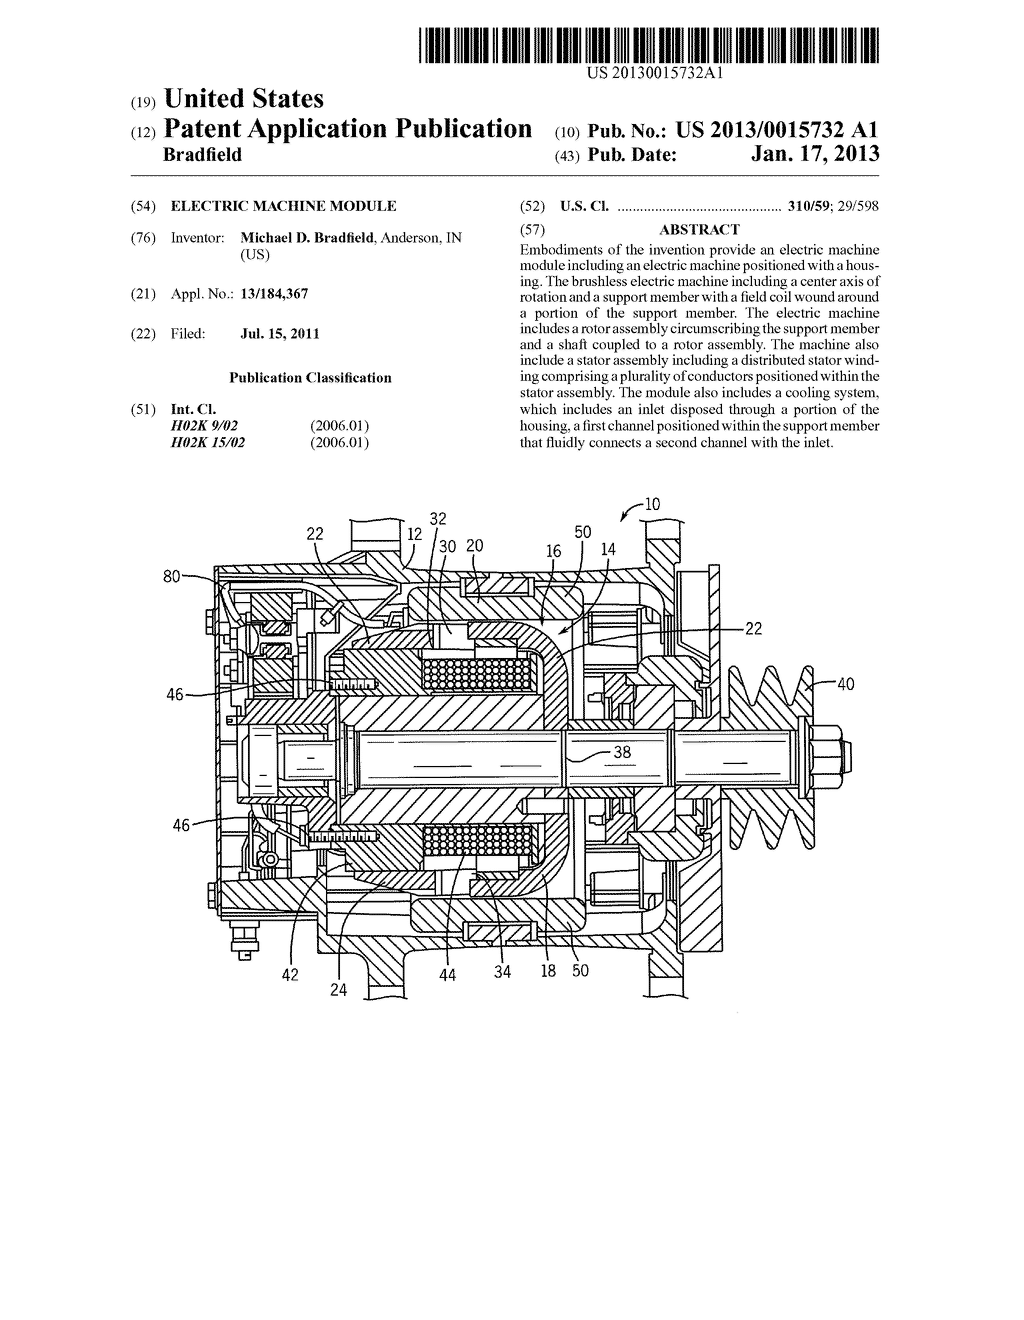 Electric Machine ModuleAANM Bradfield; Michael D.AACI AndersonAAST INAACO USAAGP Bradfield; Michael D. Anderson IN US - diagram, schematic, and image 01